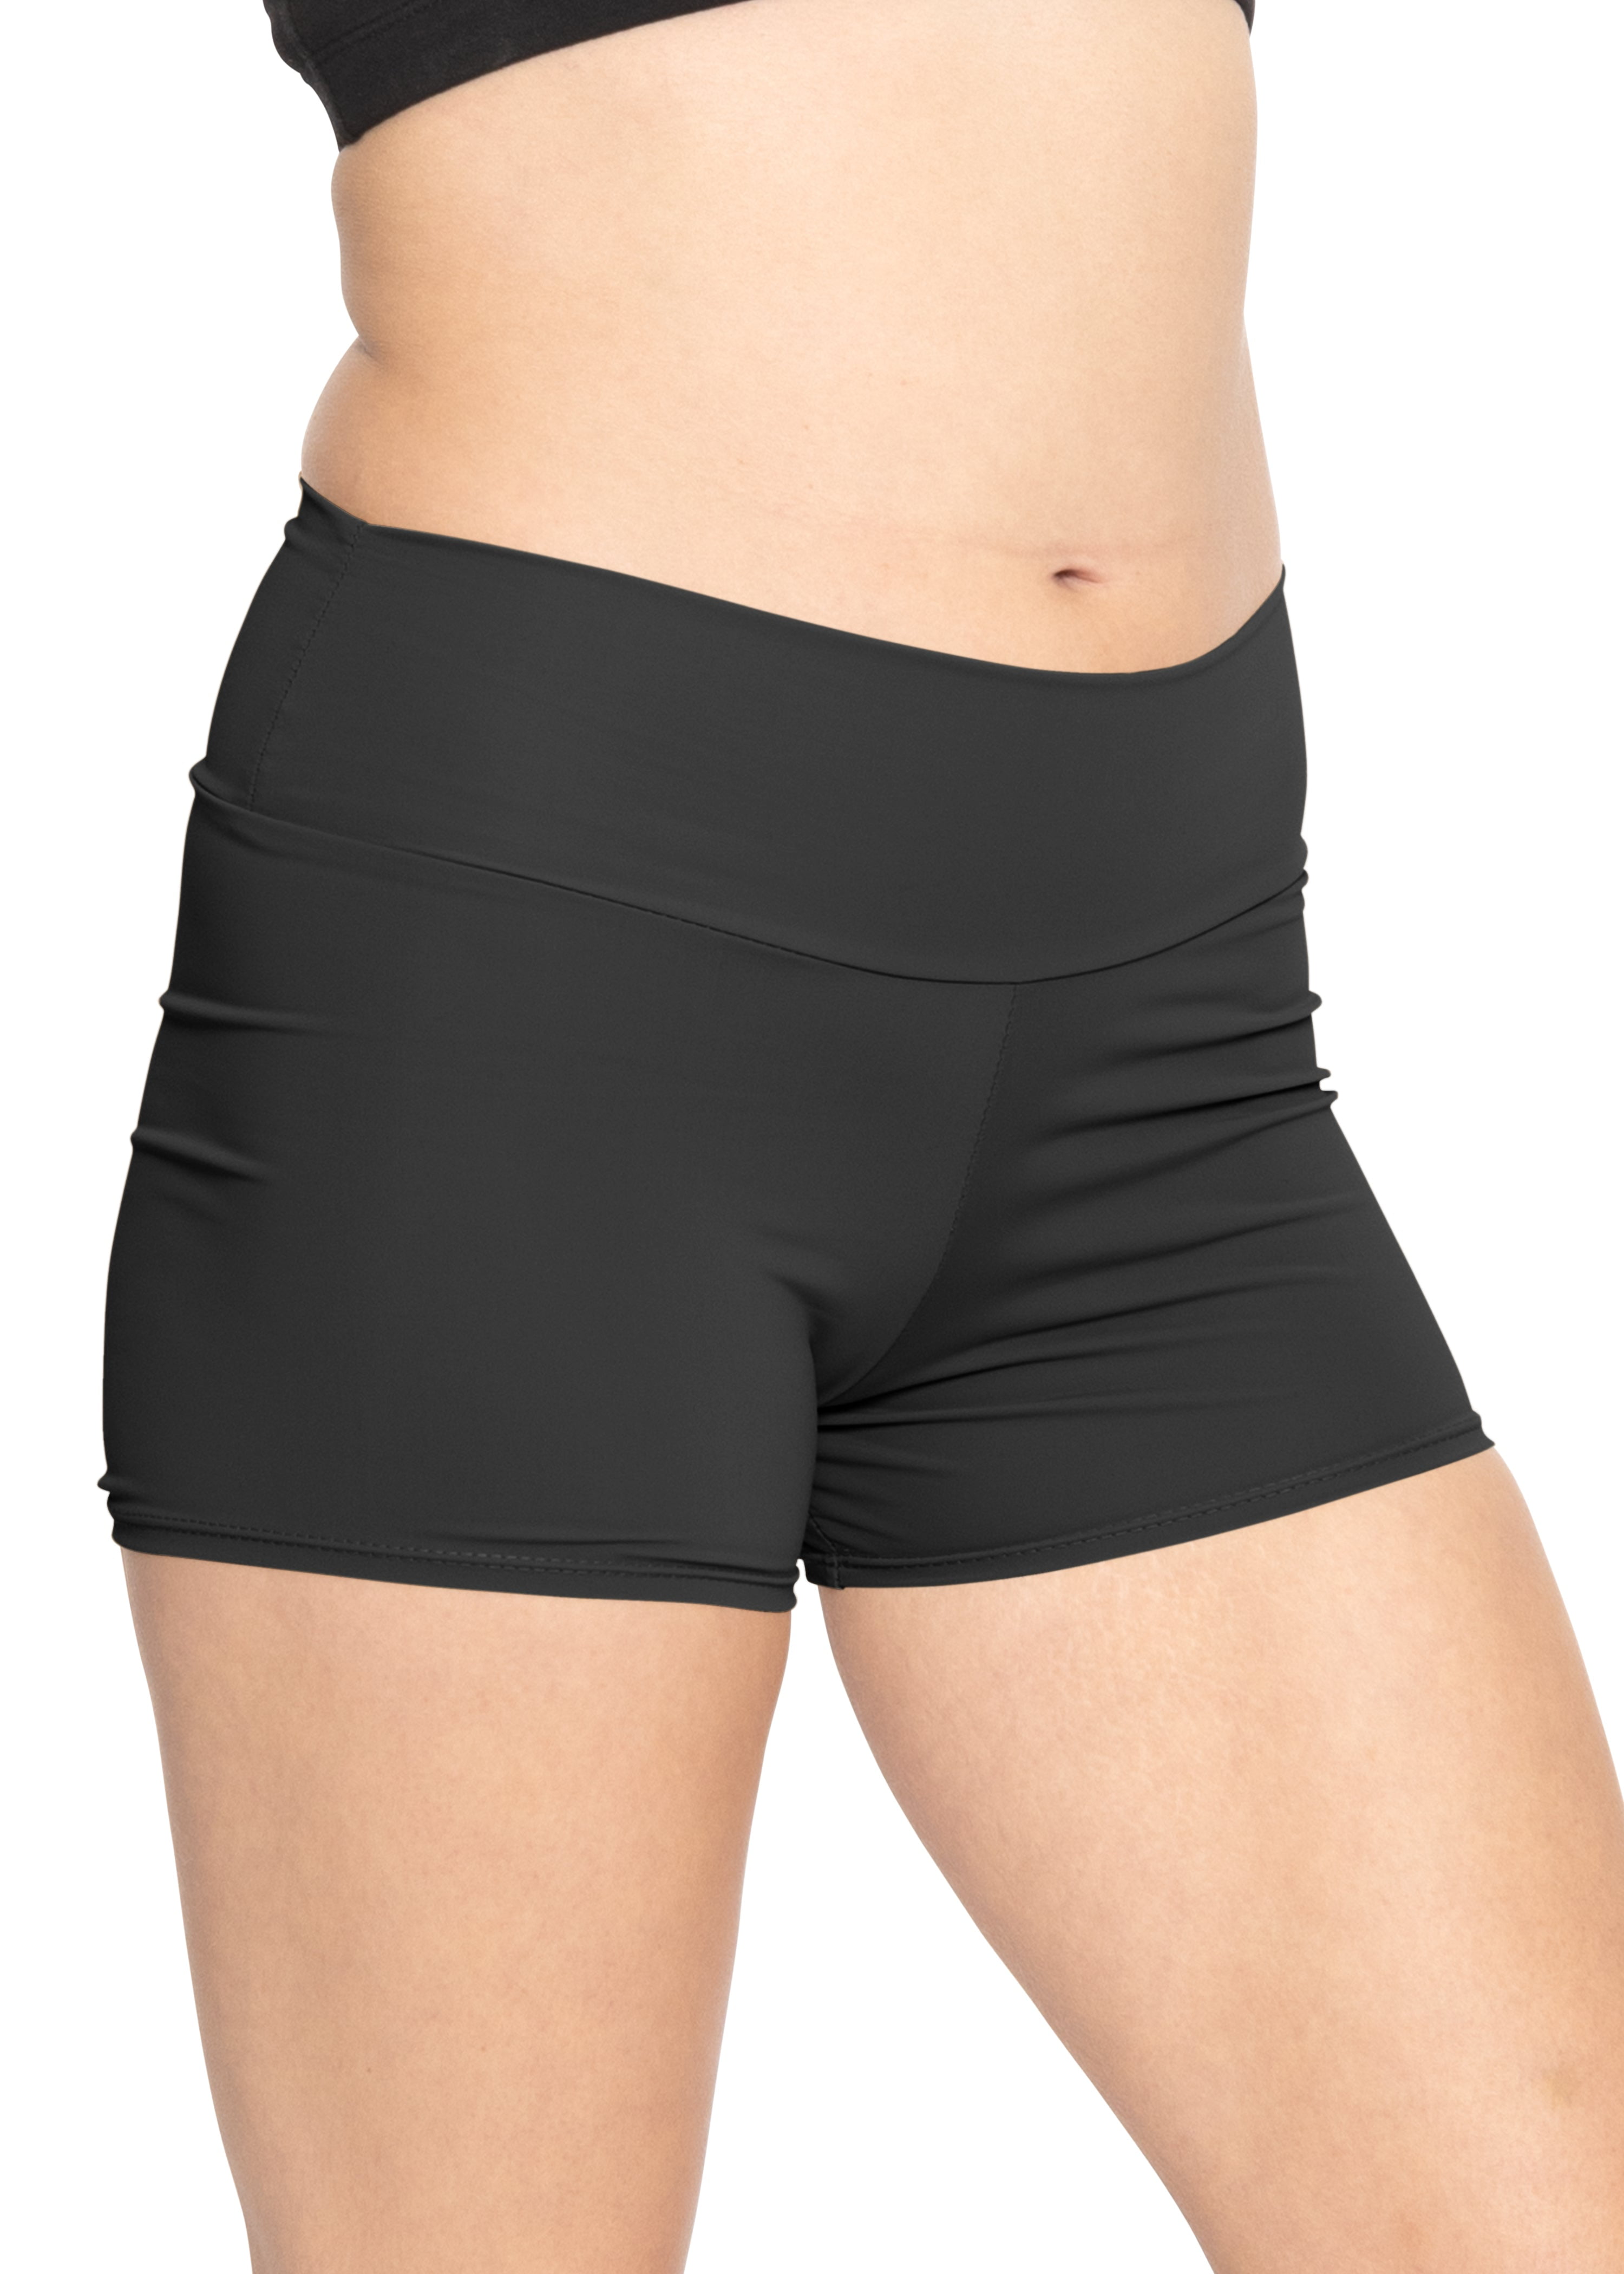 Stretch Is Comfort Women's High Waist Athletic Booty Shorts